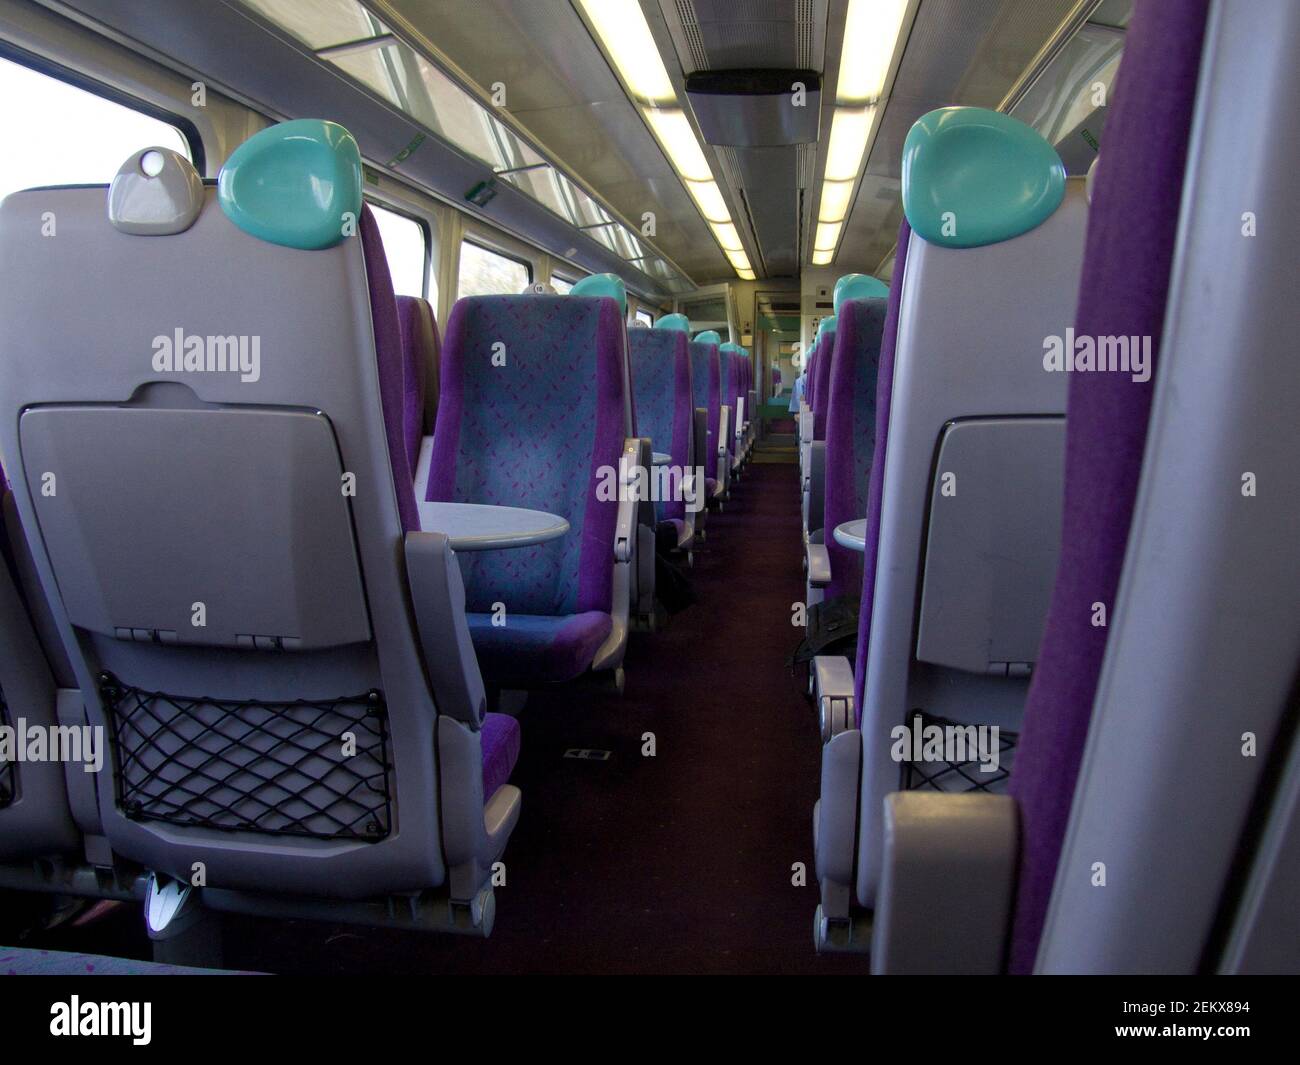 rows of seats inside of a train, take a seat, no reservation needed, aisle seat, commuting, travel, holiday Stock Photo